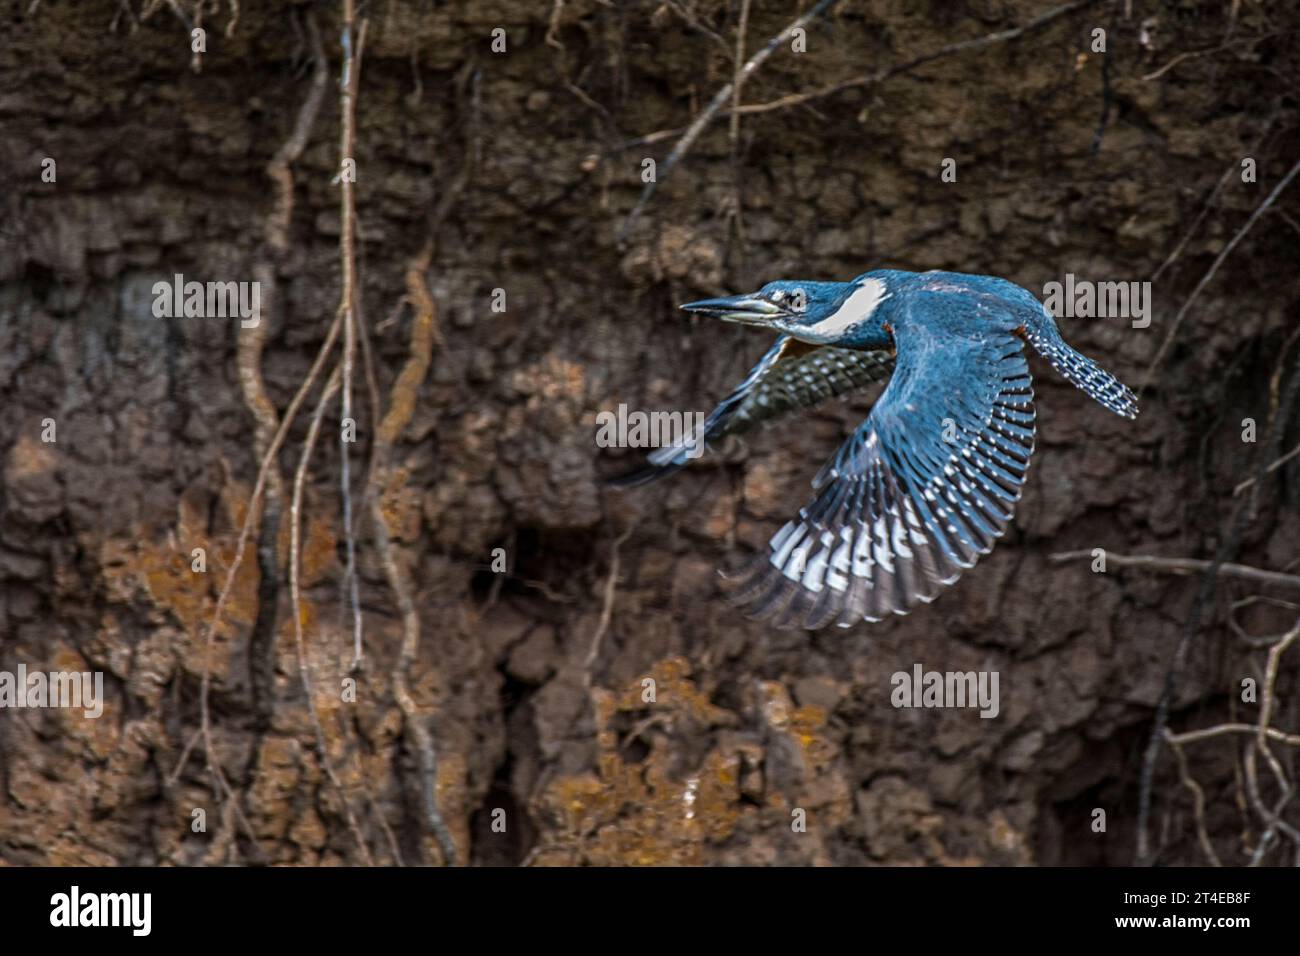 Ringed Kingfisher, Megacerlyle torquata, in flight with ring markings displayed, in the Pantanal, Mato grosso, Brazil Stock Photo